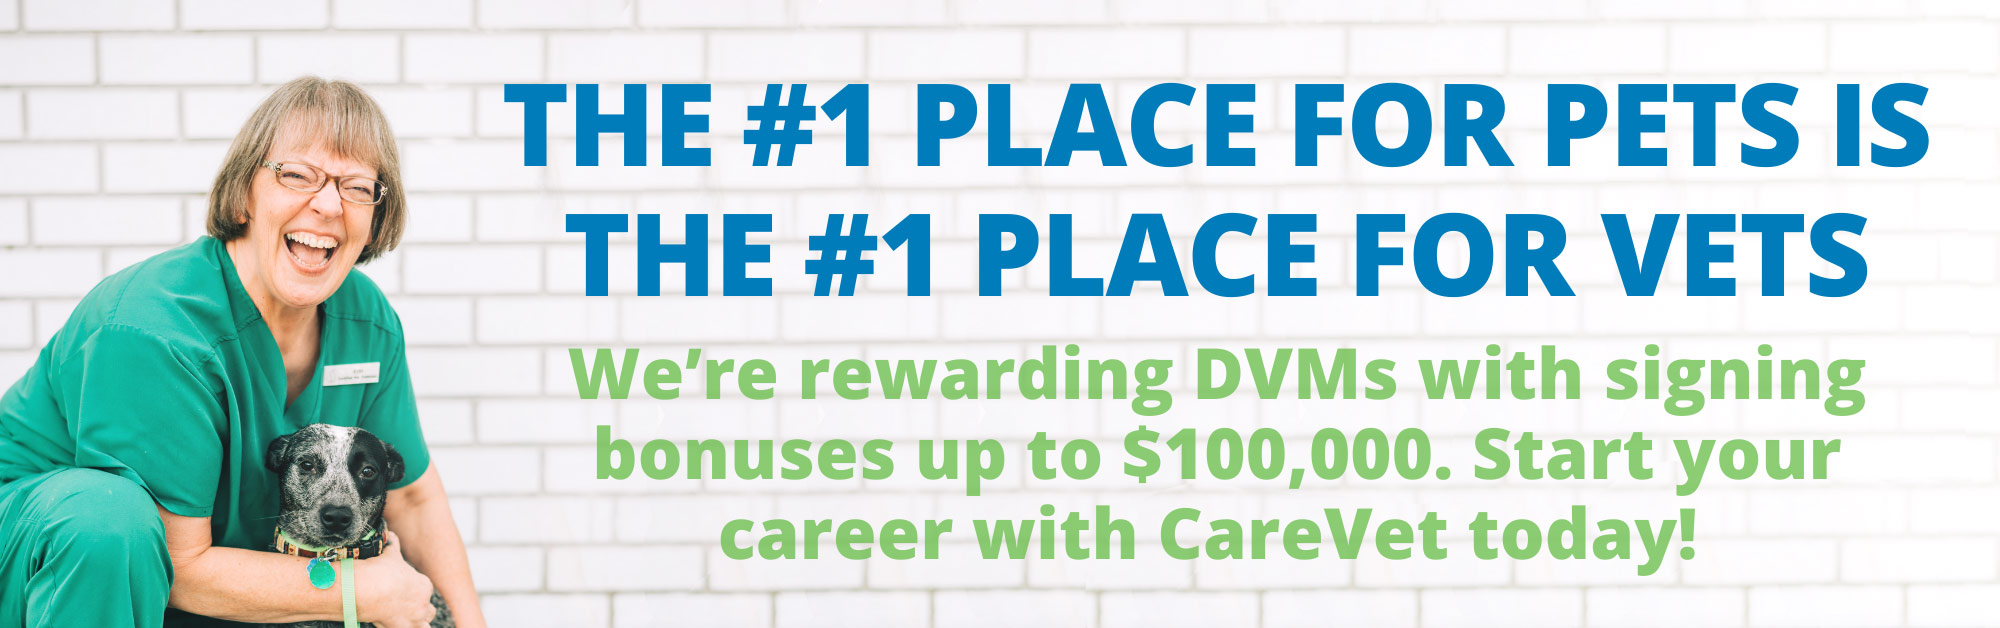 The #1 place for pets is the #1 place for vets. We're rewarding DVMs with signing bonuses up to $100,000. Start your career with CareVet today!